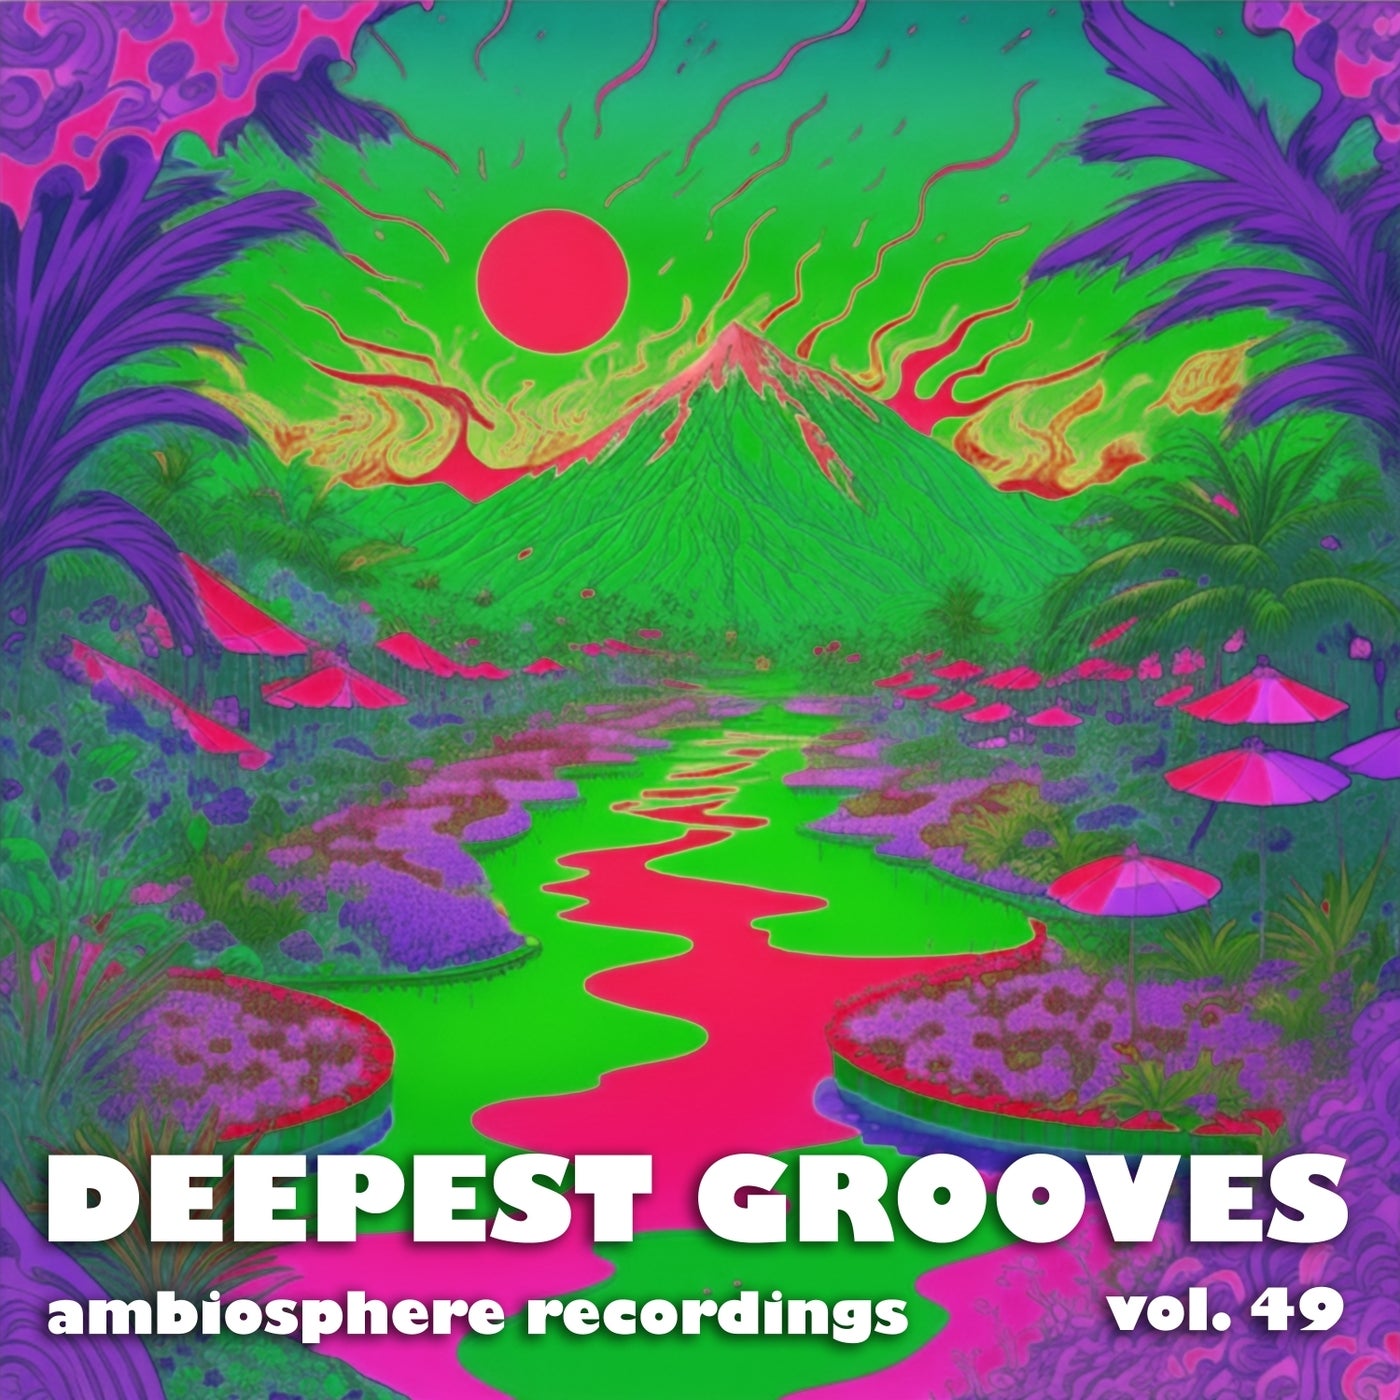 Deepest Grooves Vol. 49